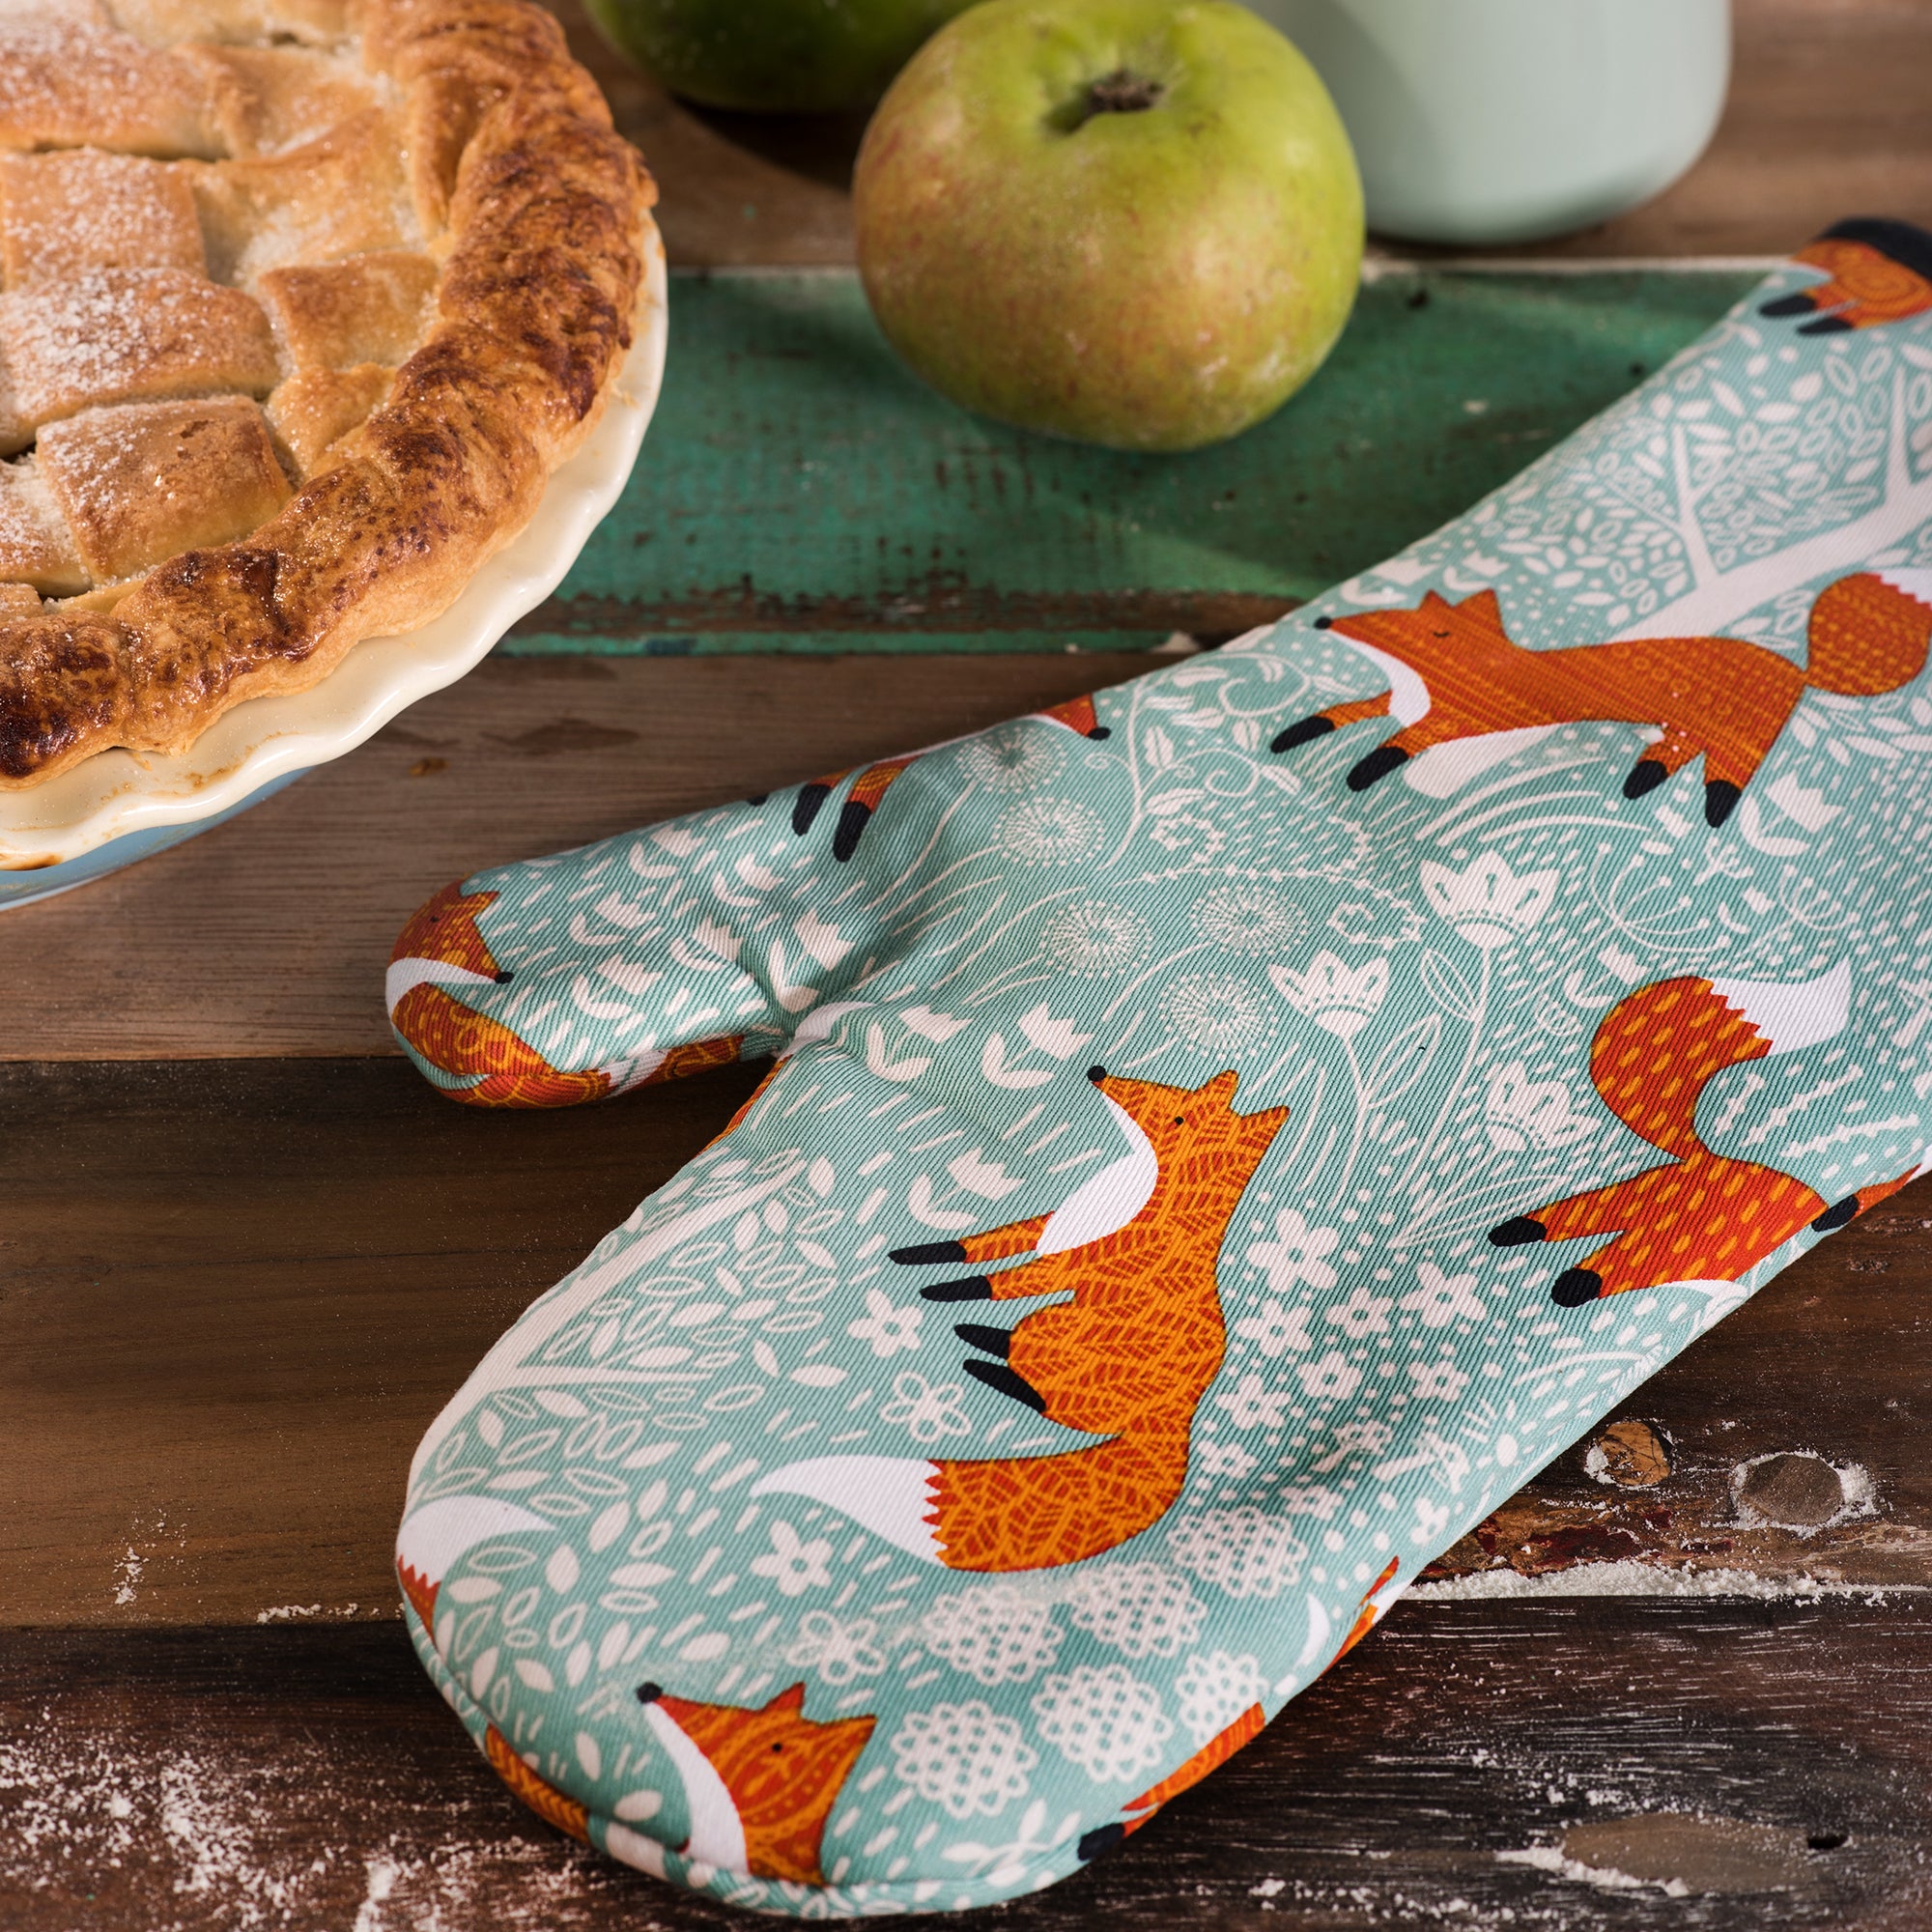 Ulster Weavers Gauntlet Single Oven Glove - Foraging Fox (100% Cotton Outer; 100% Polyester wadding; CE marked, Blue) - Gauntlet Oven Glove - Ulster Weavers